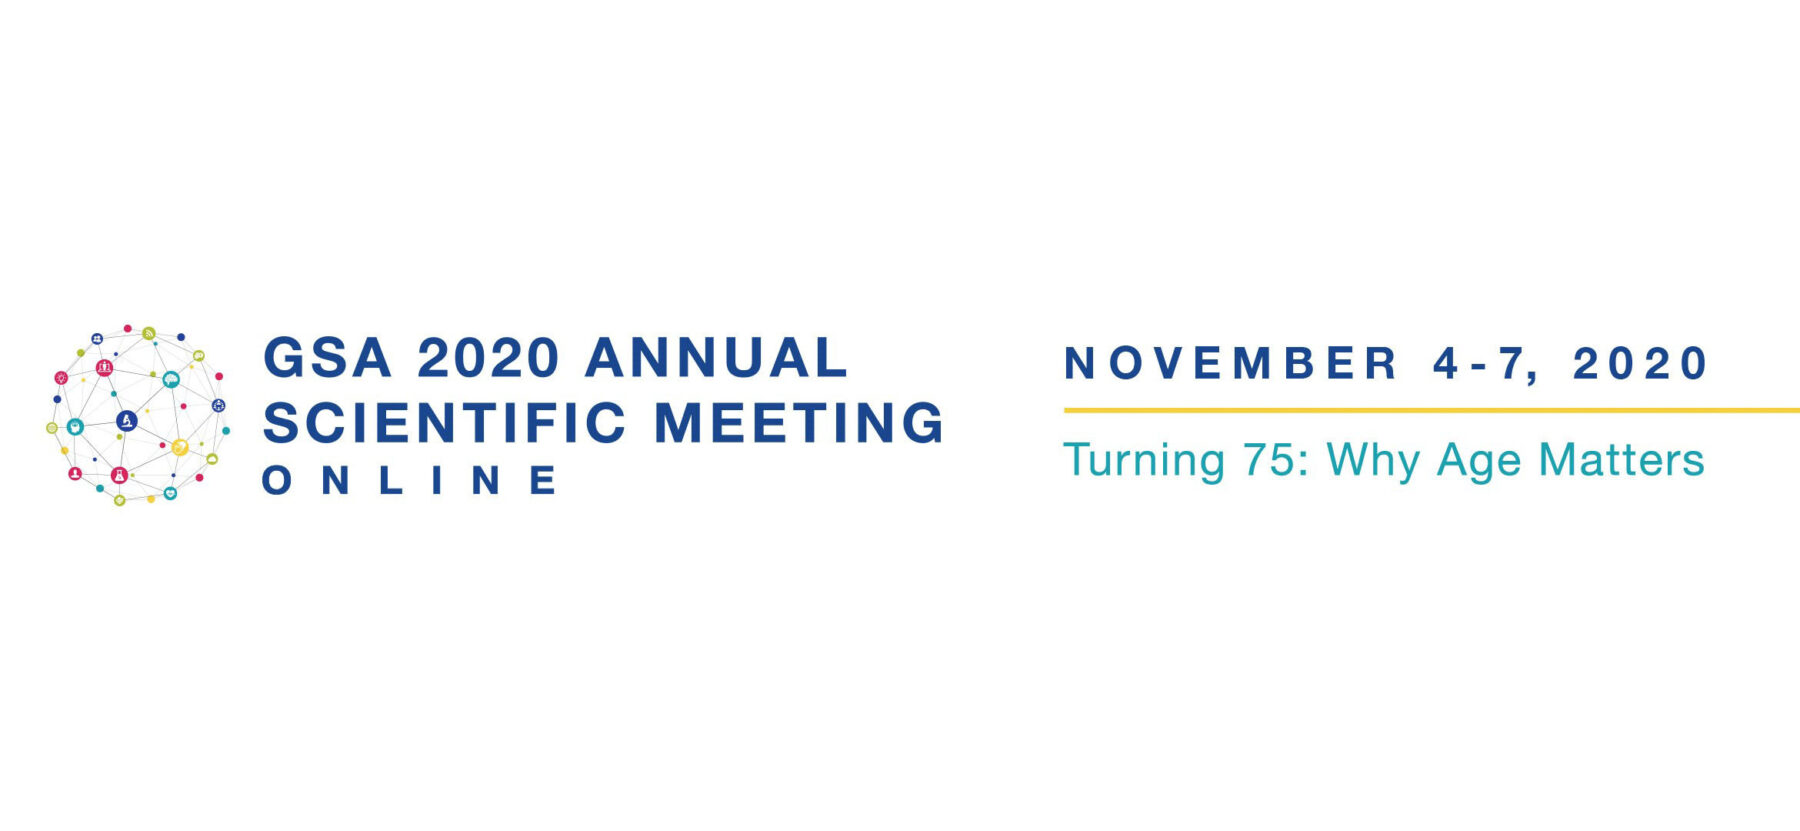 Banner for GSA 2020 Annual Scientific Meeting Online: November 4-7, 2020